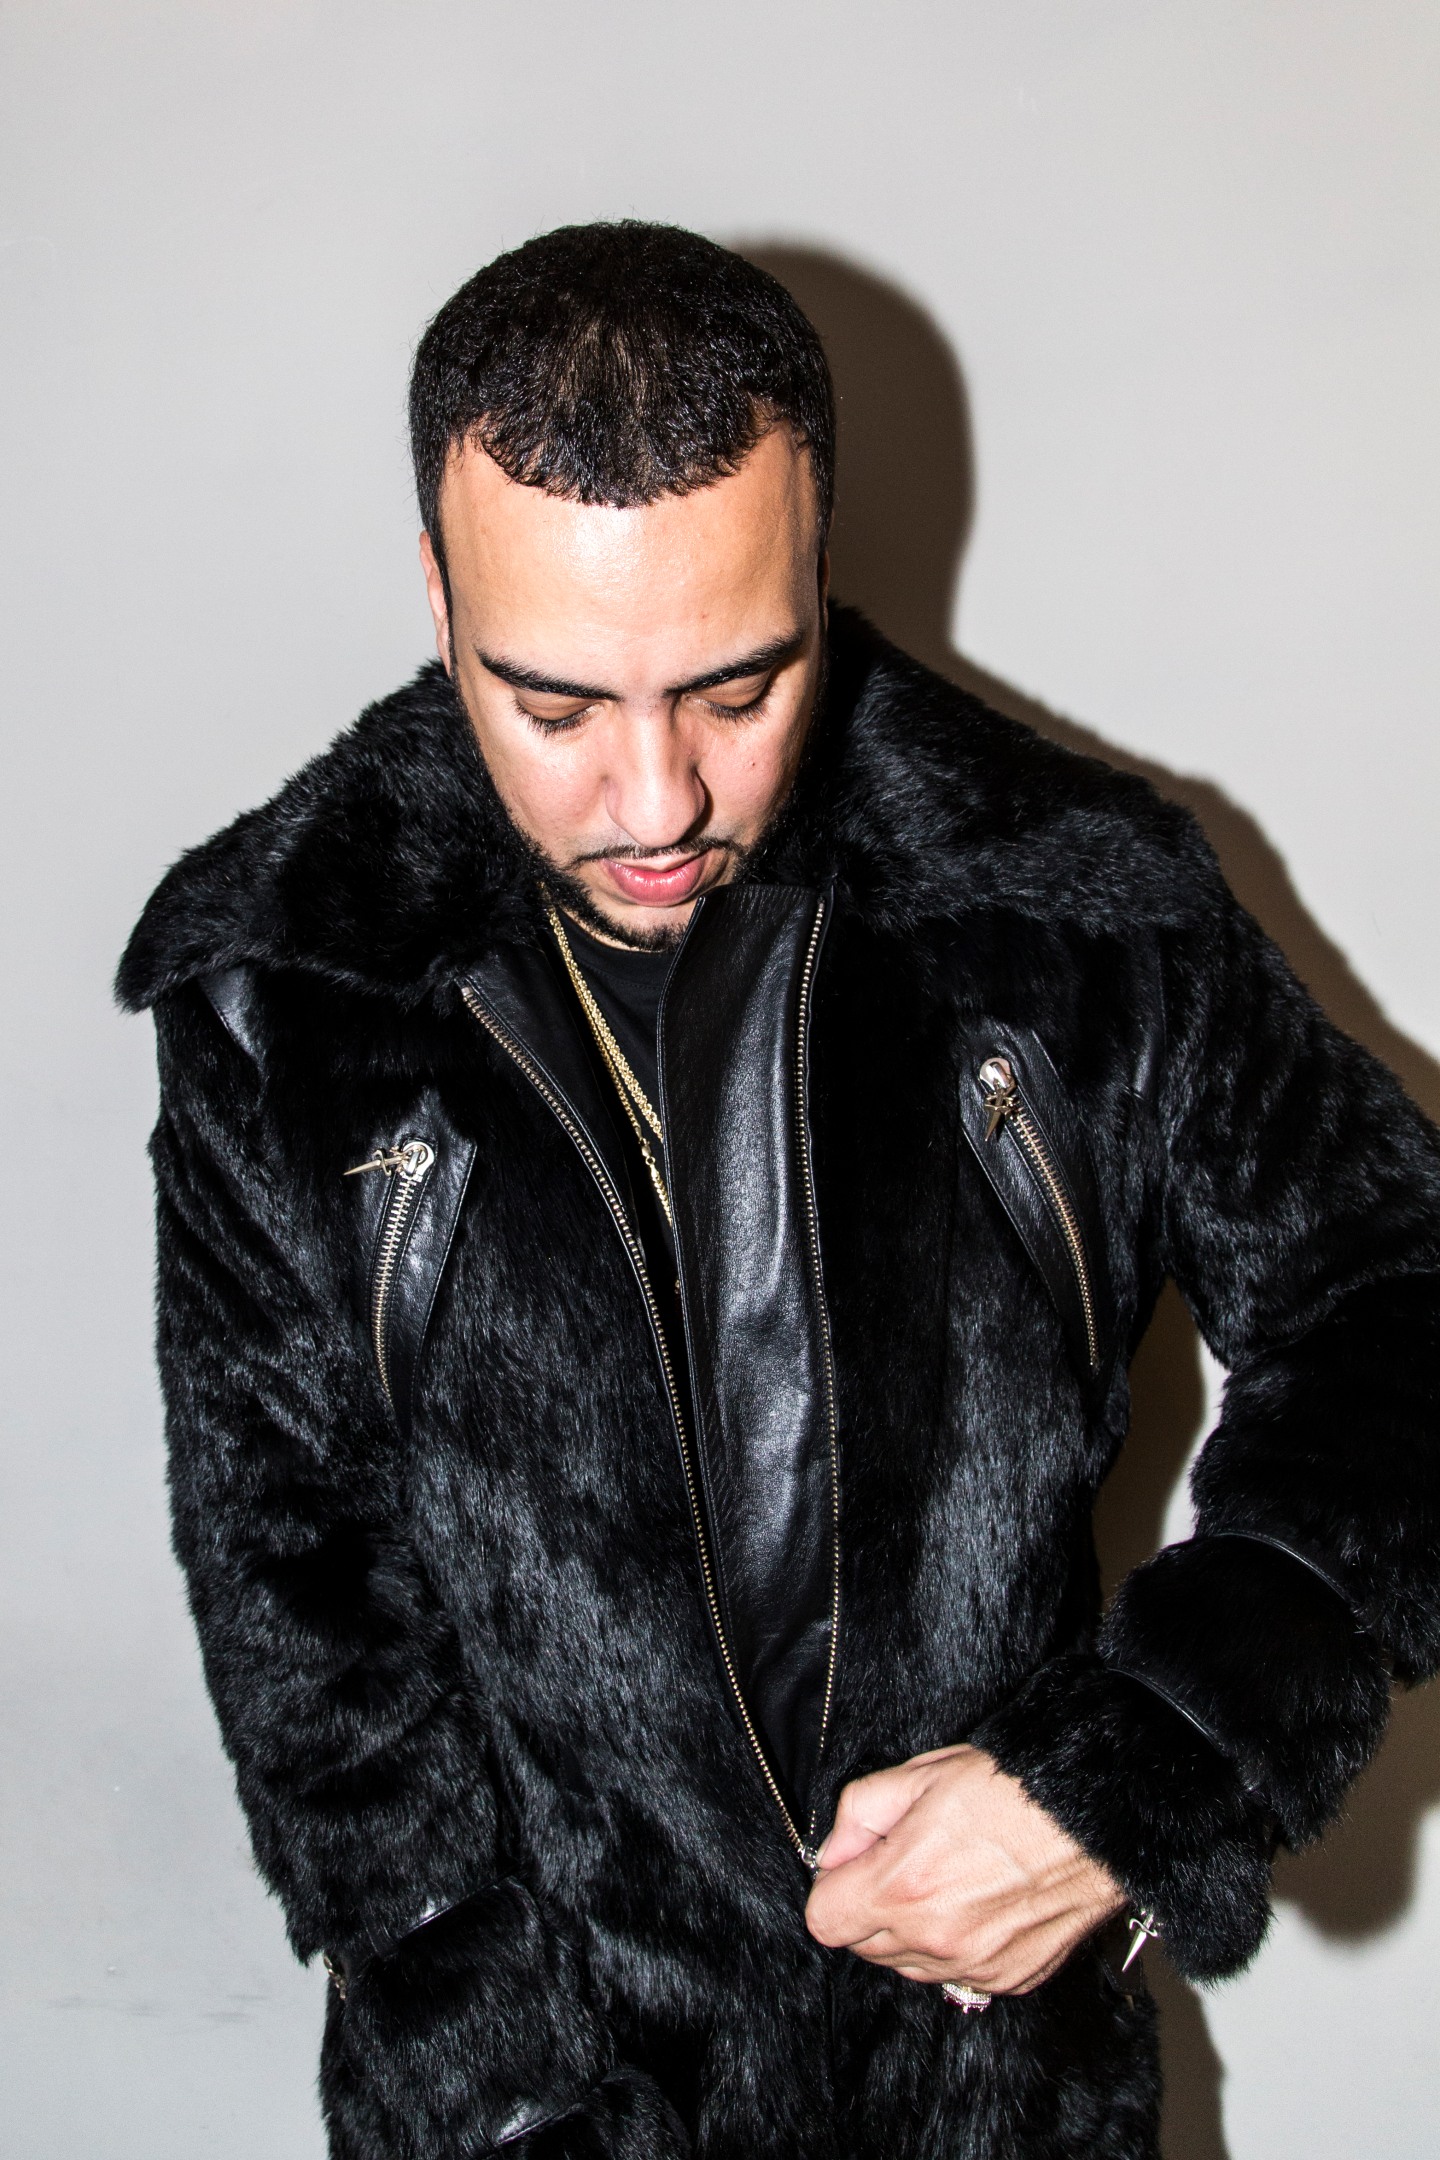 The Things I Carry: French Montana